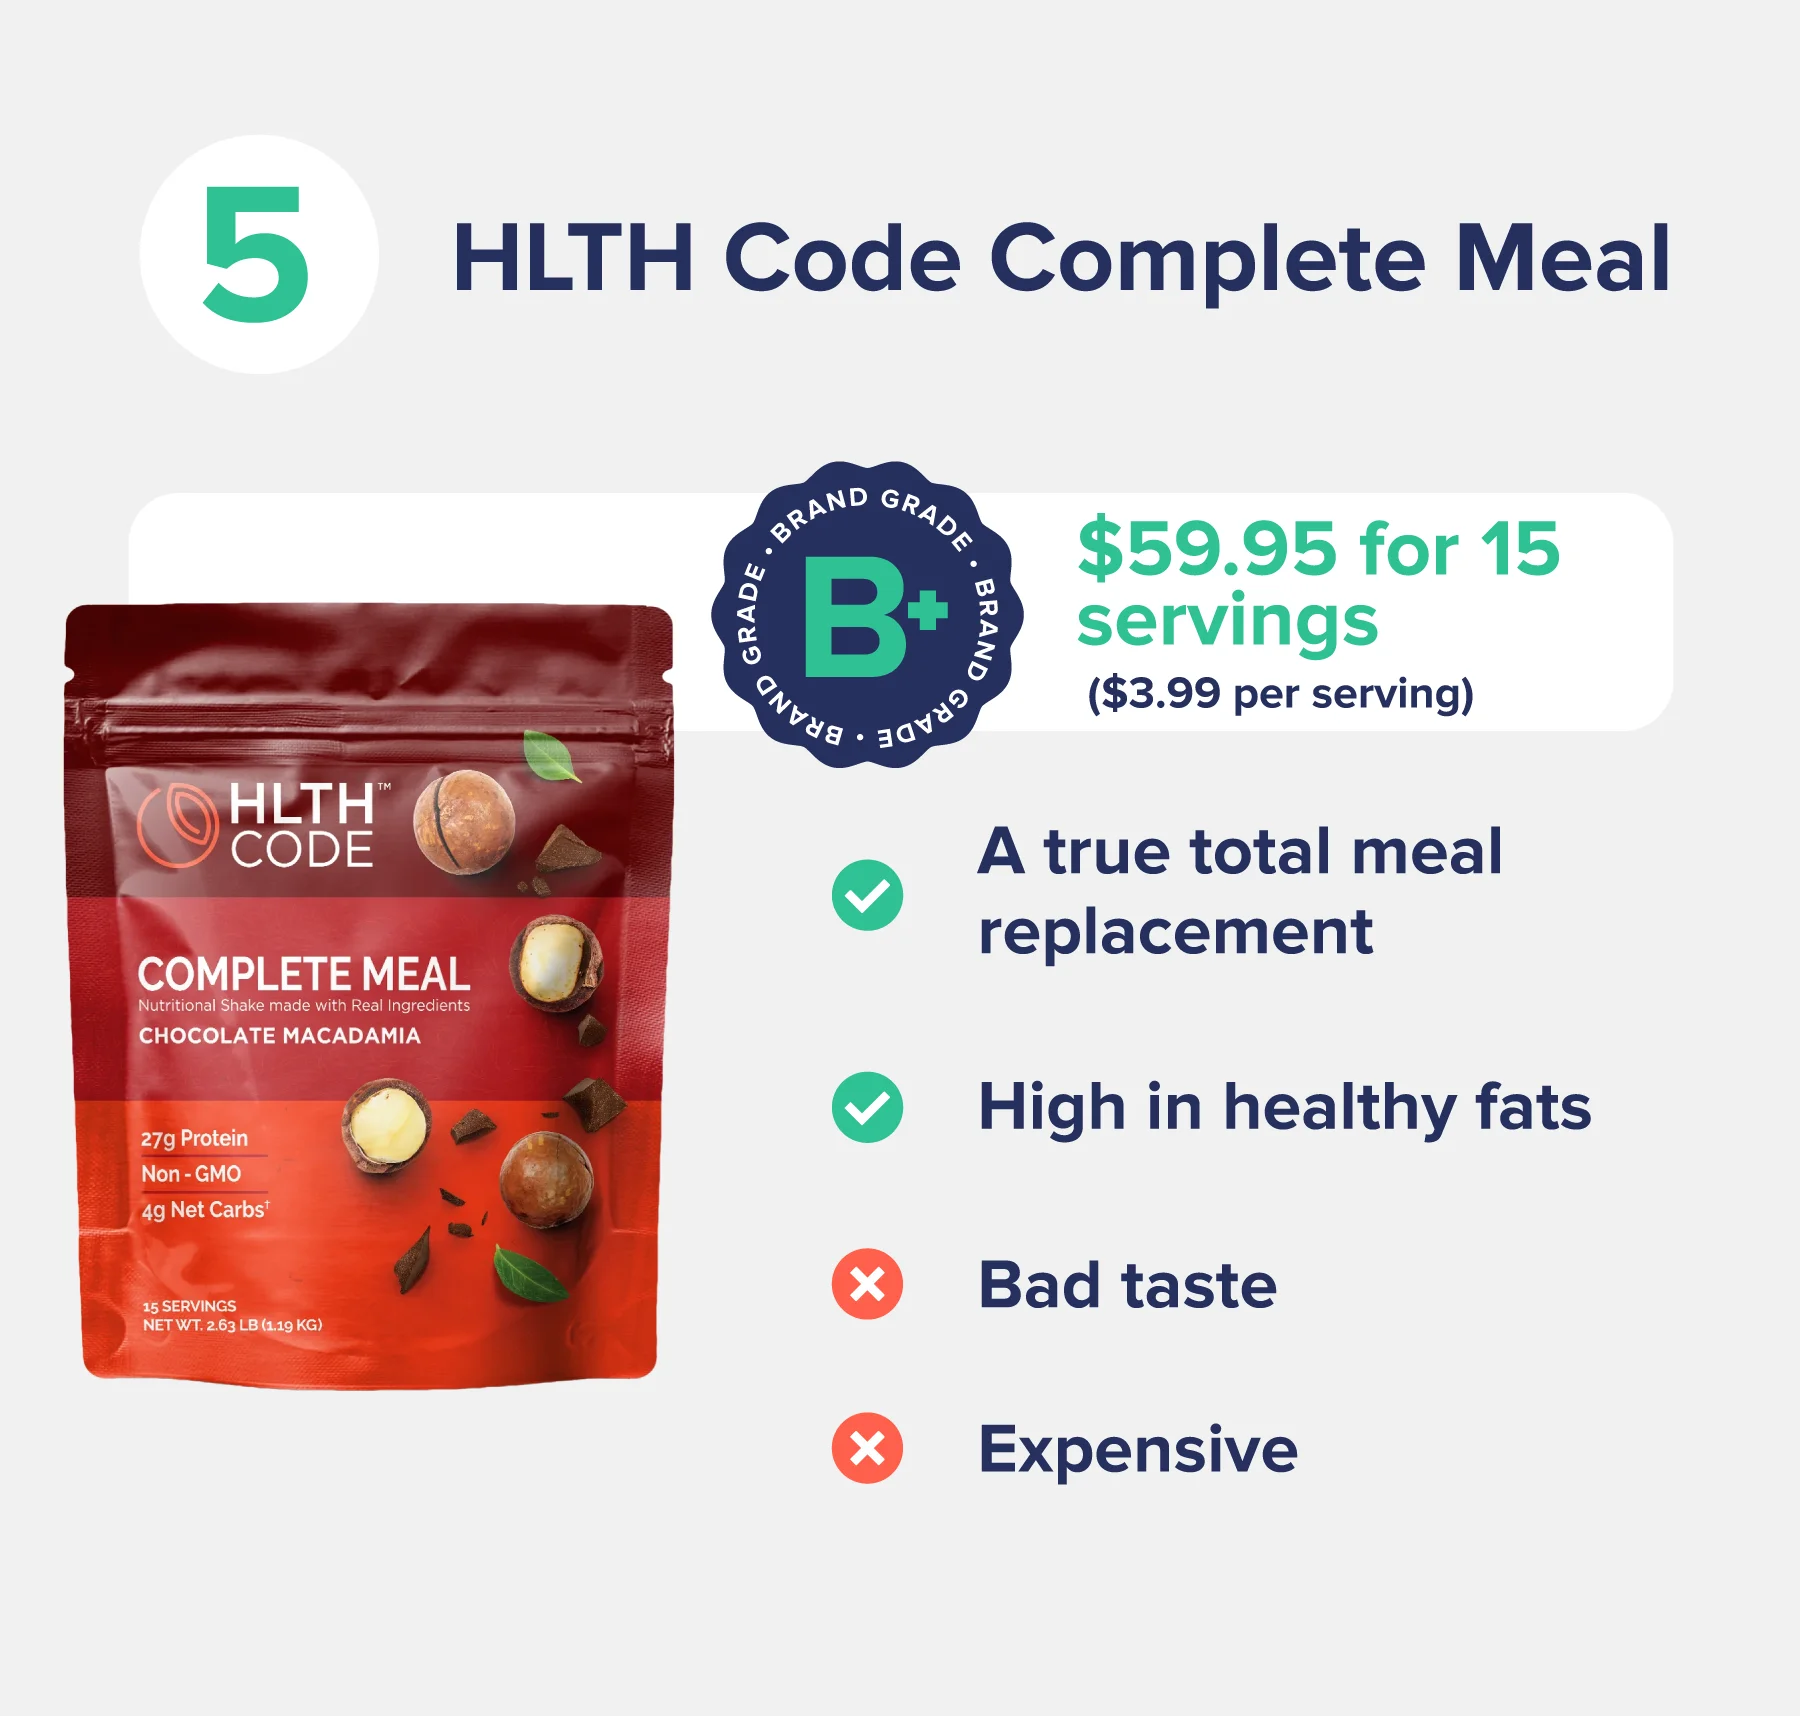 HLTH Code Complete Meal with list of pros and cons